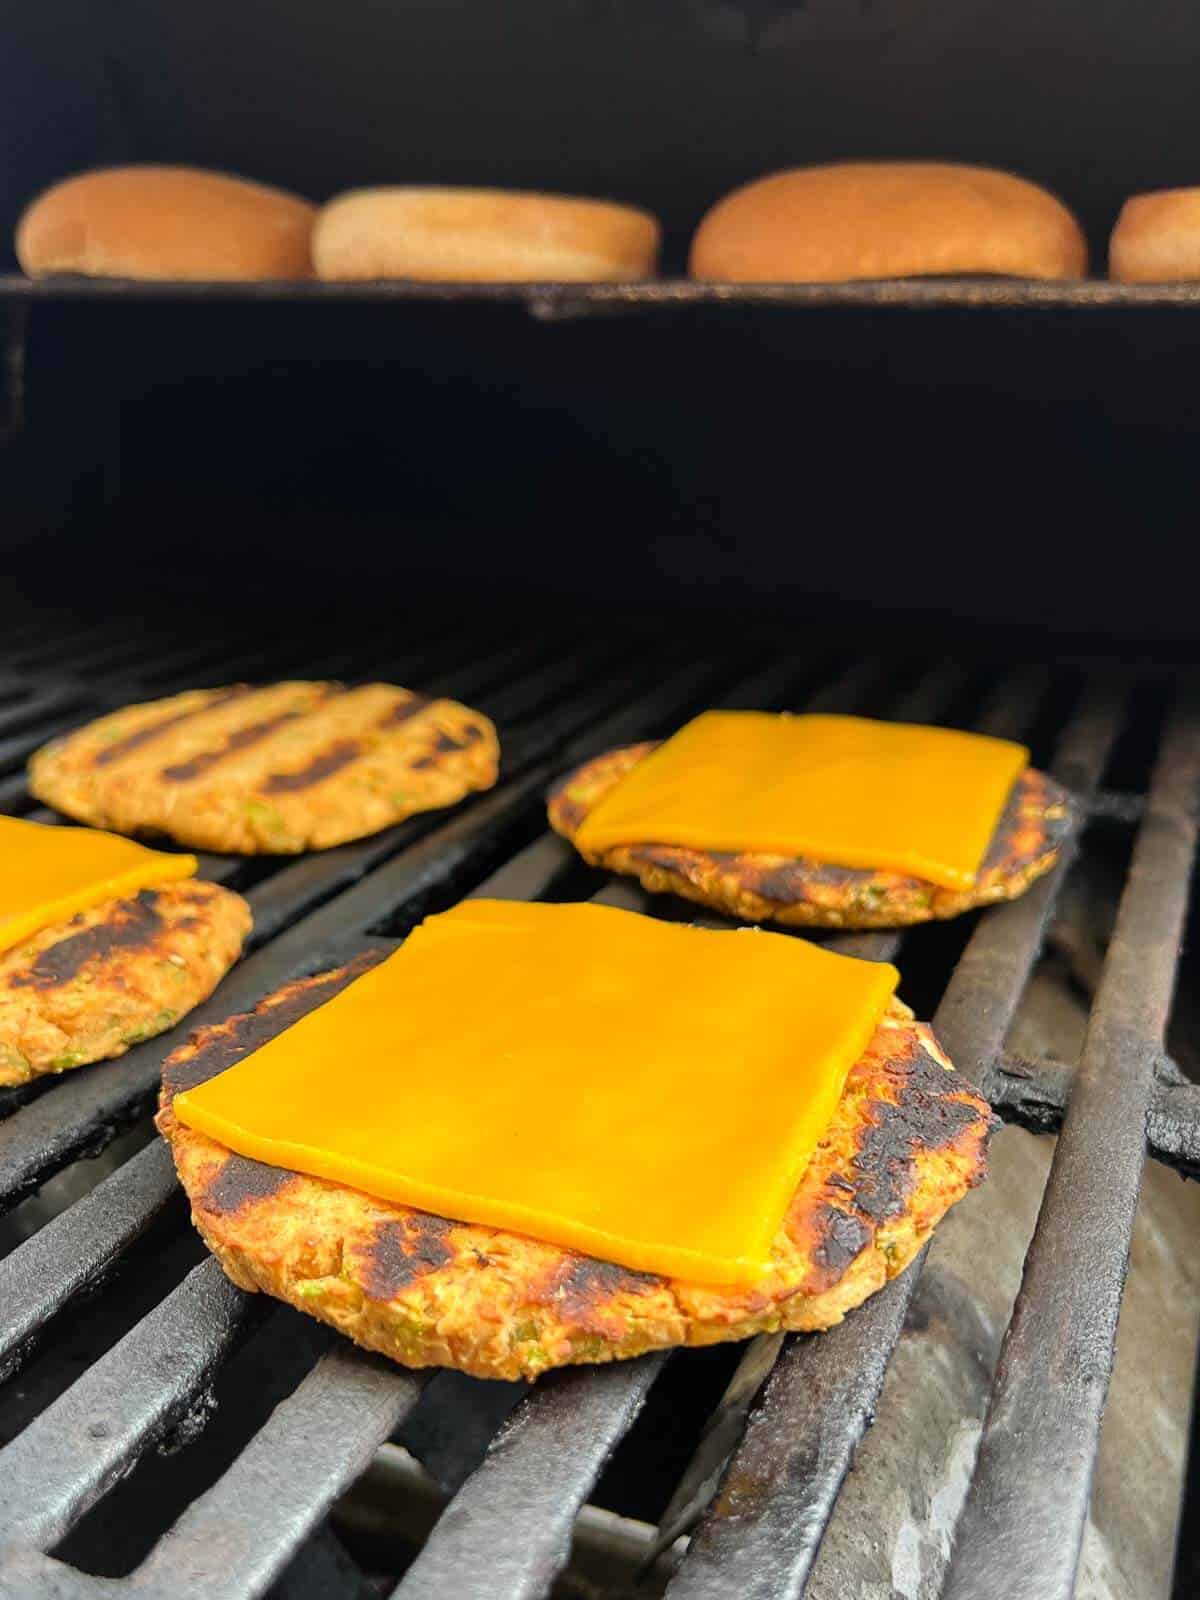 chickpea burgers on a grill with vegan cheddar cheese on top, to allow melting.